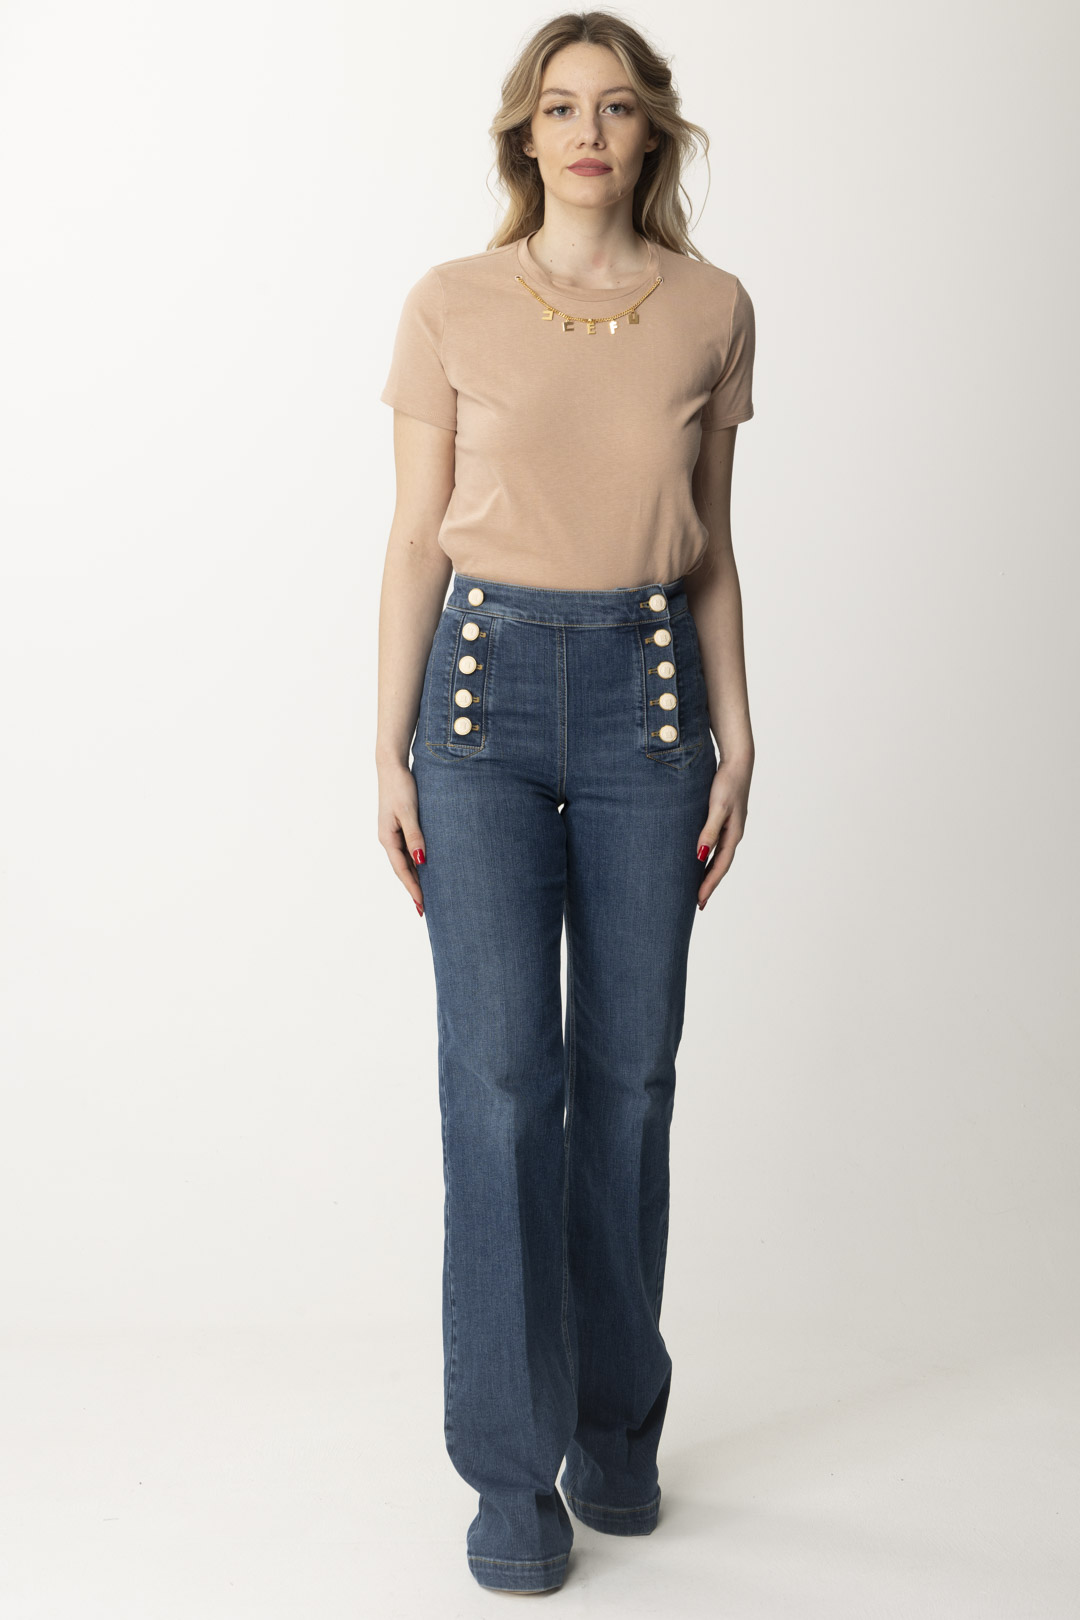 Preview: Elisabetta Franchi T-shirt with Charm Necklace Nudo